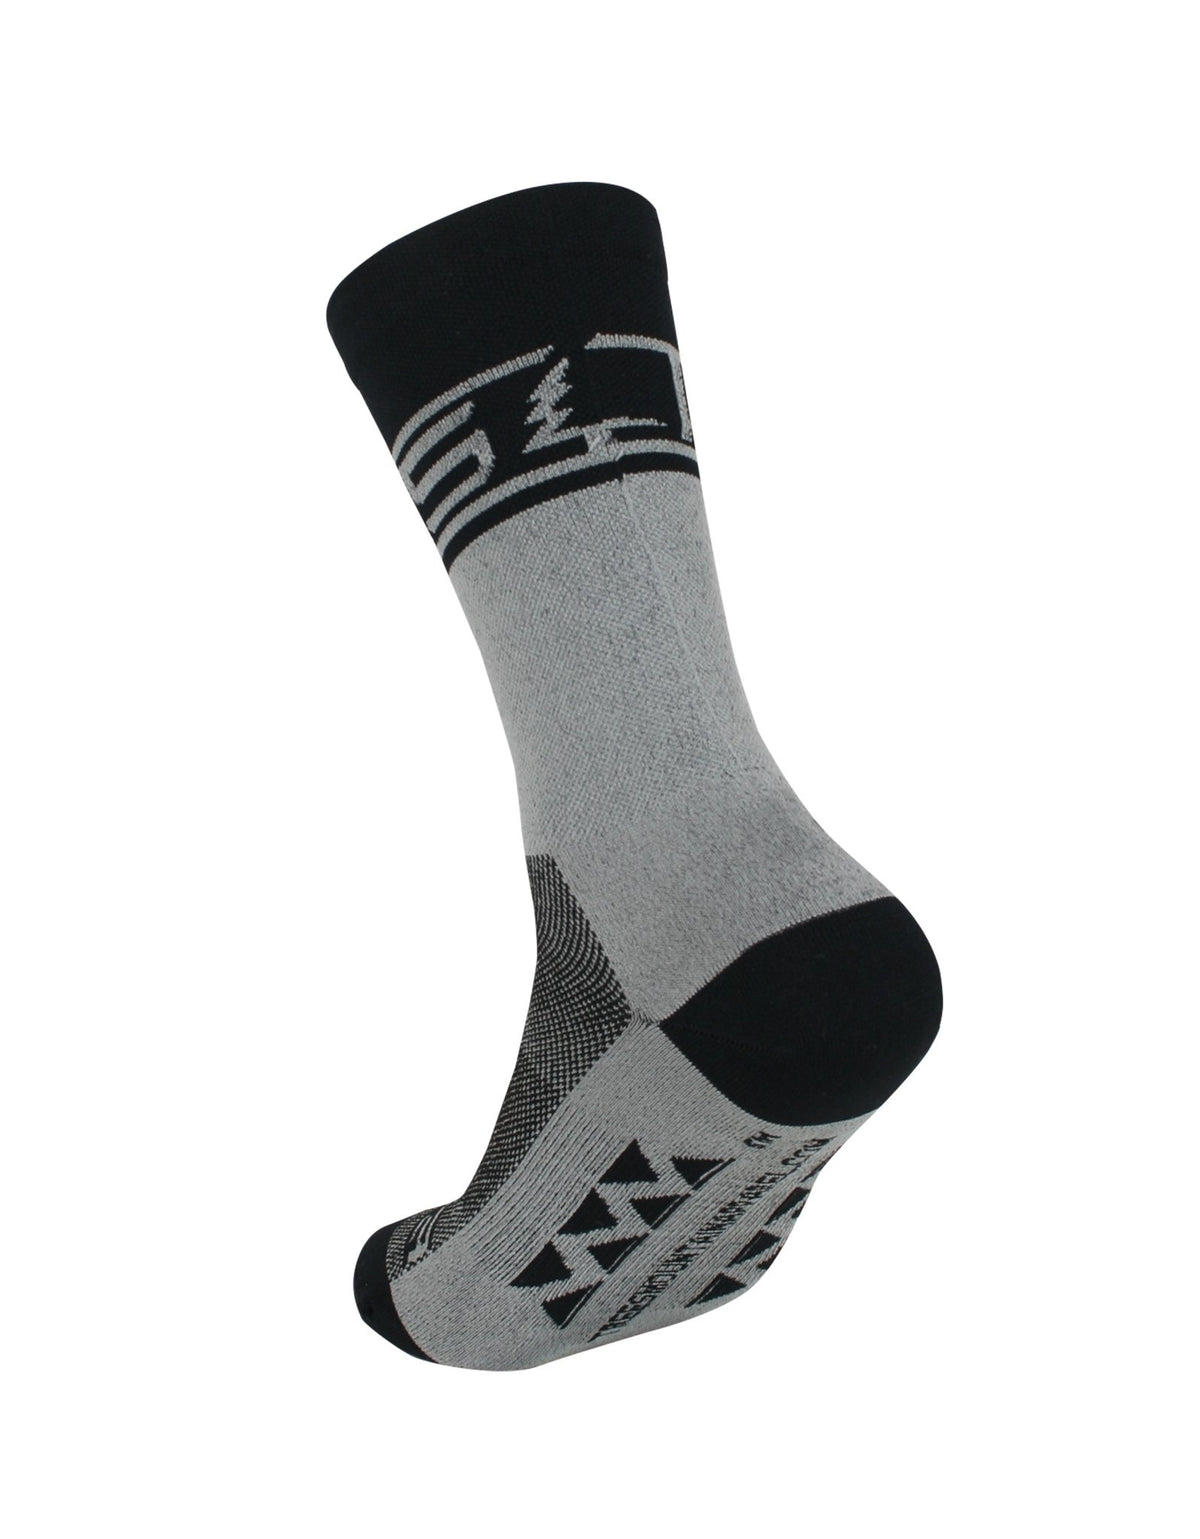 Chaussettes de Vélo SLICK | Light Grey in TMA-187.8MW by TREES Mountain Apparel